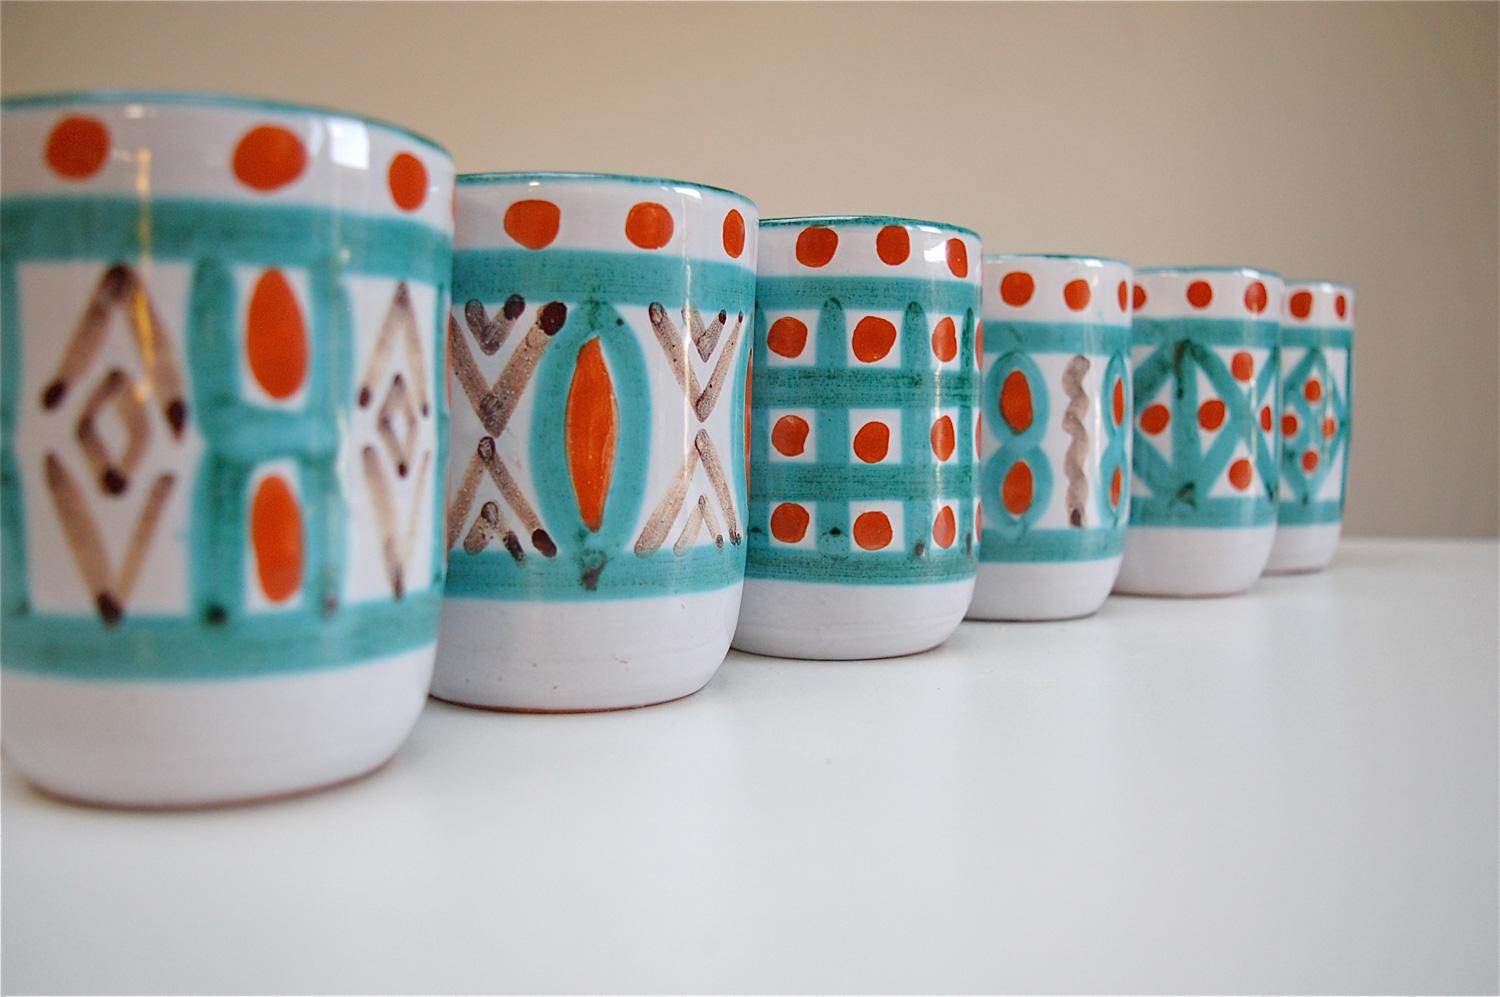 Set of six handmade vintage mugs by Antoine Fazio in the well-known pottery town of Vallauris in the South of France. Dipped in a white glaze as a base color, each mug was then decorated by hand with an individual design consisting predominately out